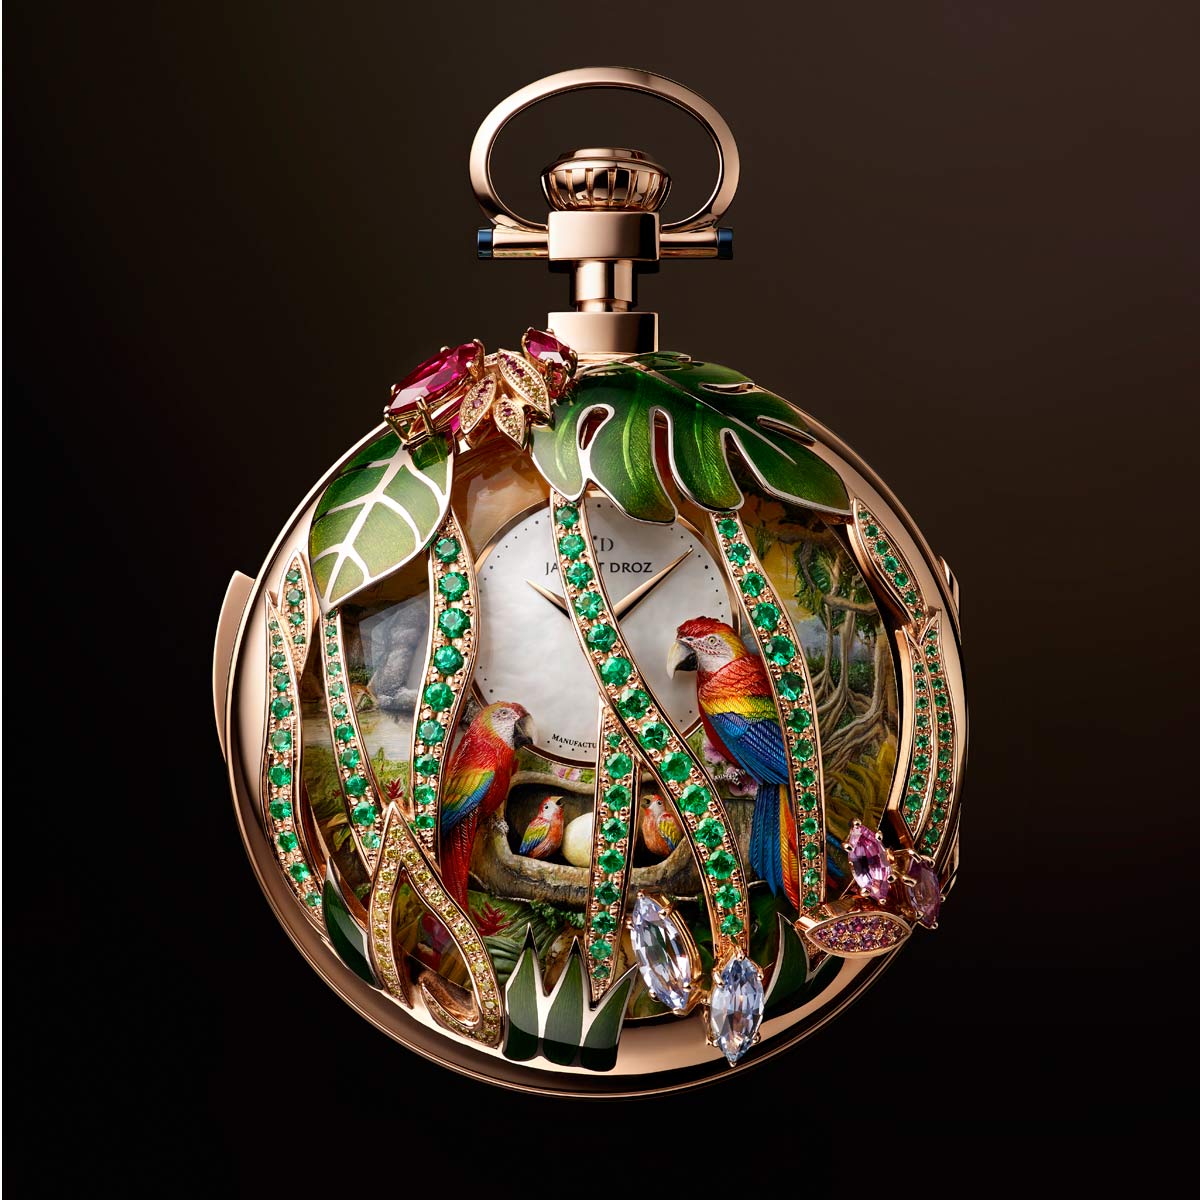 Jaquet Droz - Parrot Repeater Pocket Watch | Time and Watches | The ...